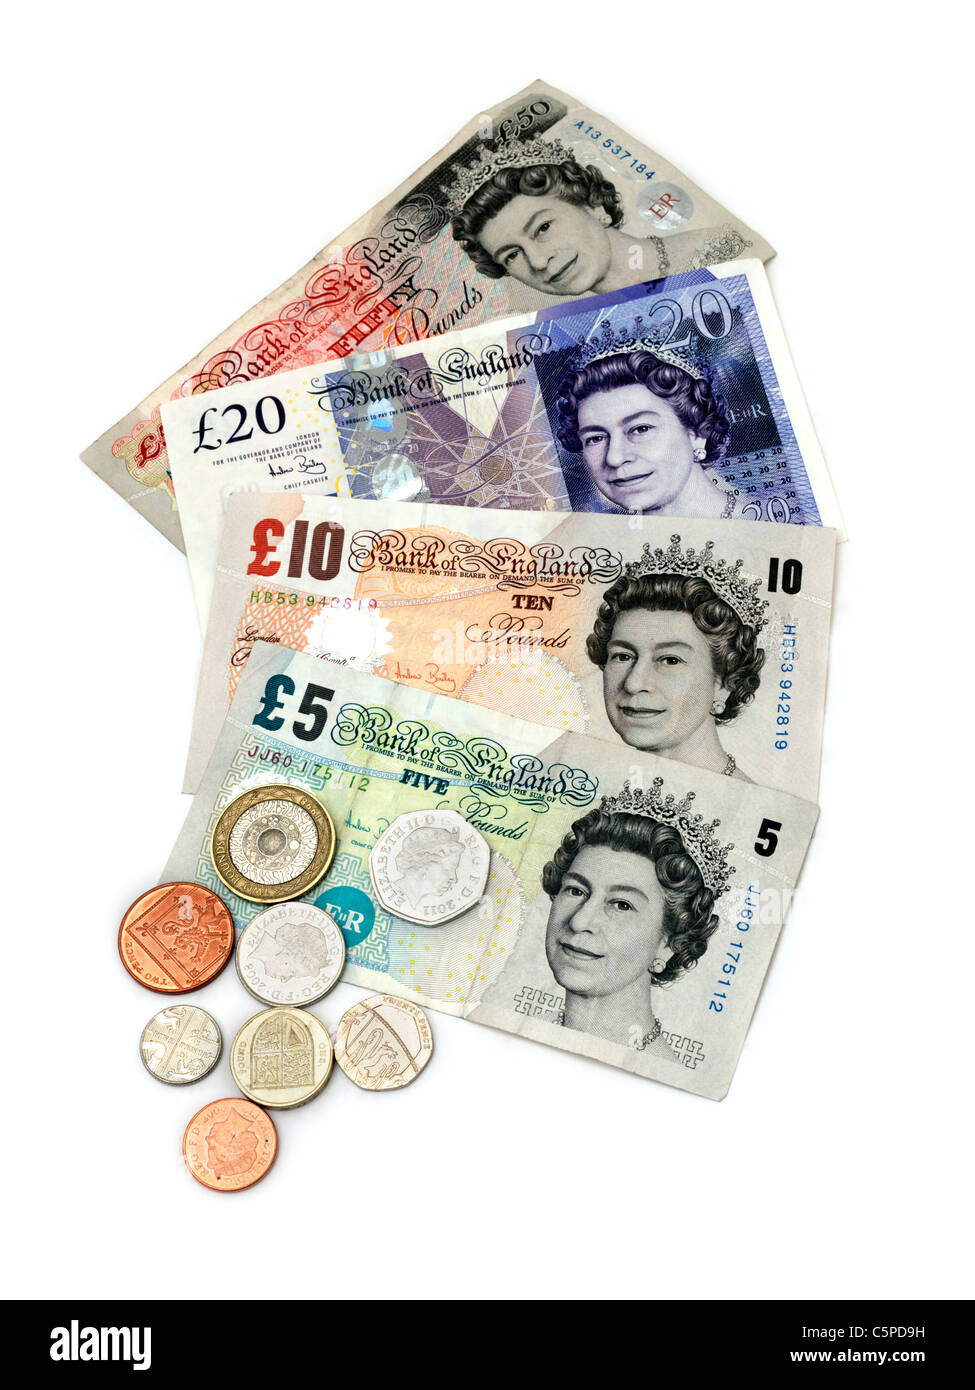 Sterling Banknotes And Coins £5,£10,£20,£50 and 1 Pence, 2 Pence, 5 Pence, 10 pence, 20 Pence, 50 pence, £1 Coin And £2 Coin Stock Photo